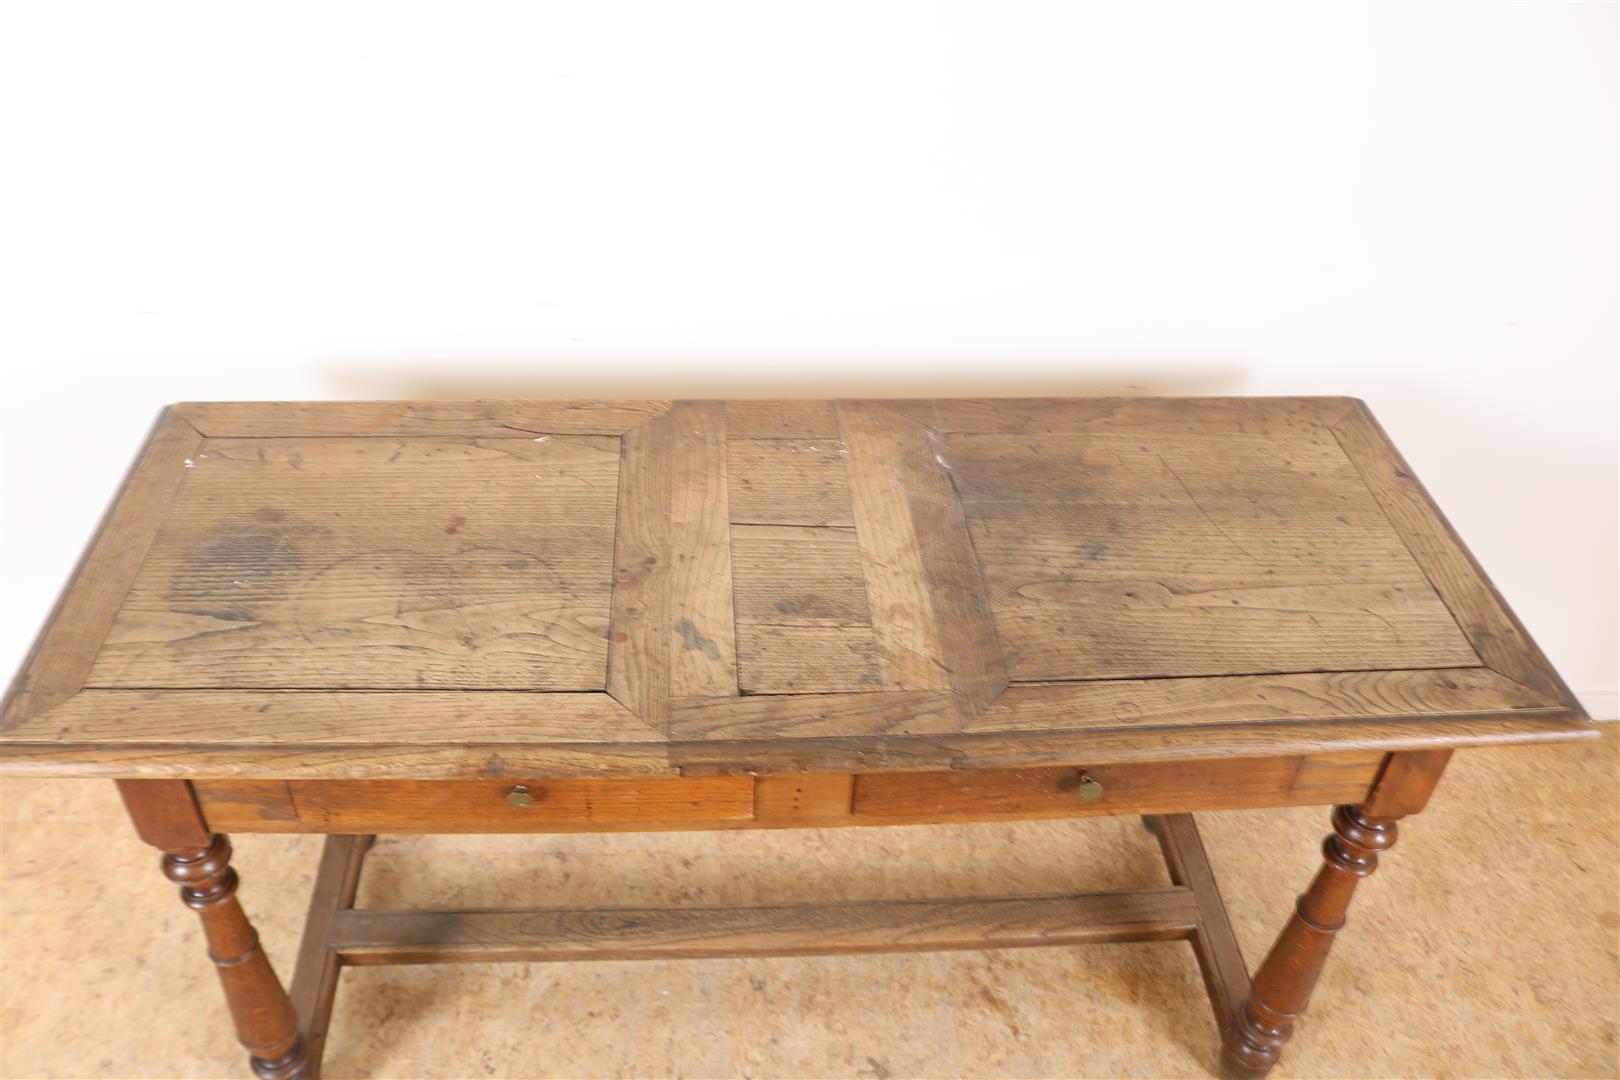 Chestnut side table with 2 drawers and H-shaped rule, 19th century, 71 x 140 x 54 cm. - Image 2 of 4